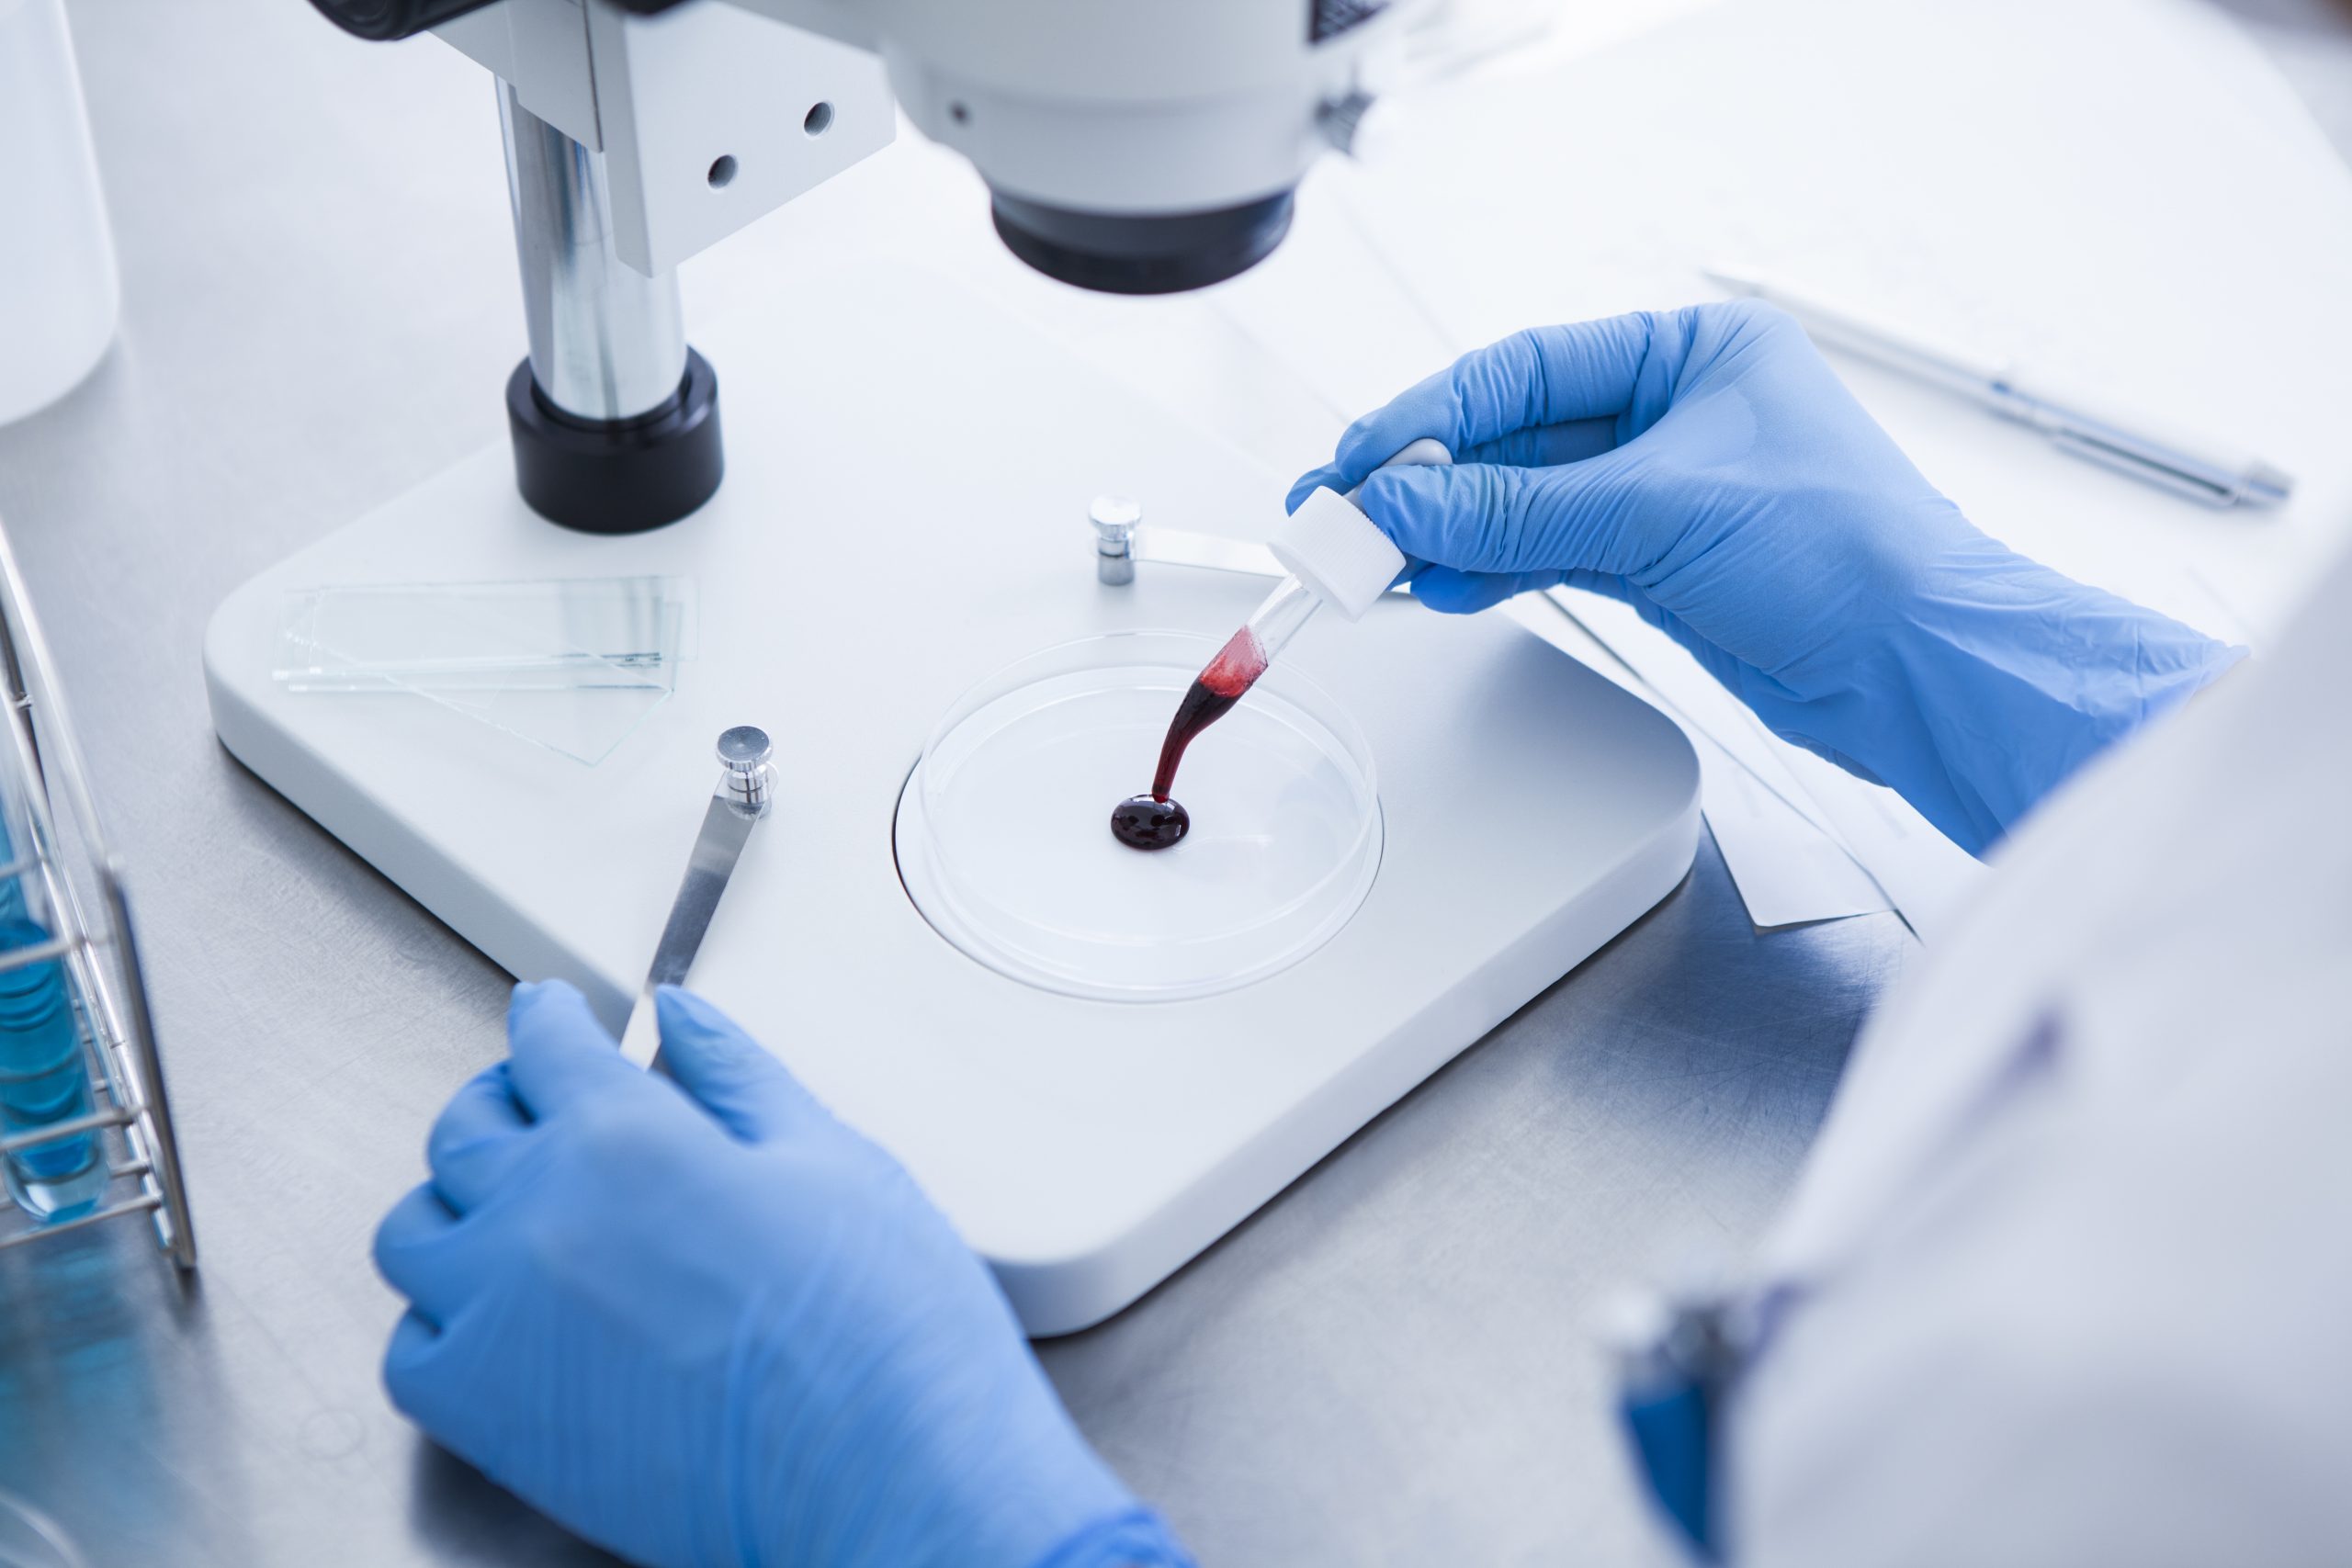 NonInvasive Blood Assay Detects Early Colorectal Cancer